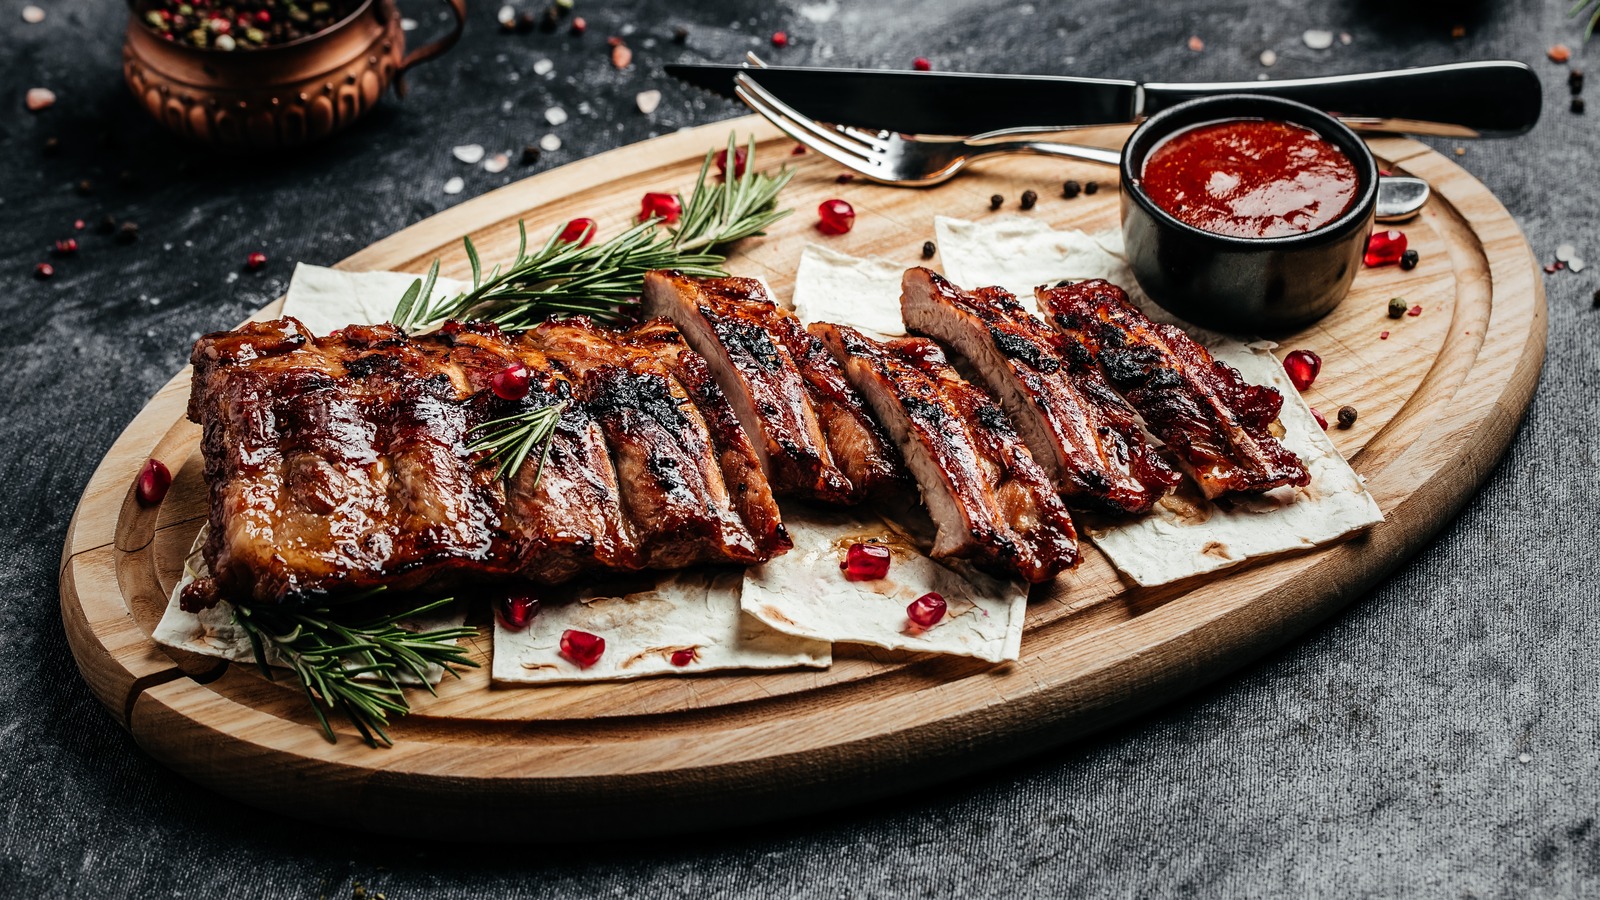 Baby Back Ribs vs Spareribs: What's the Difference?